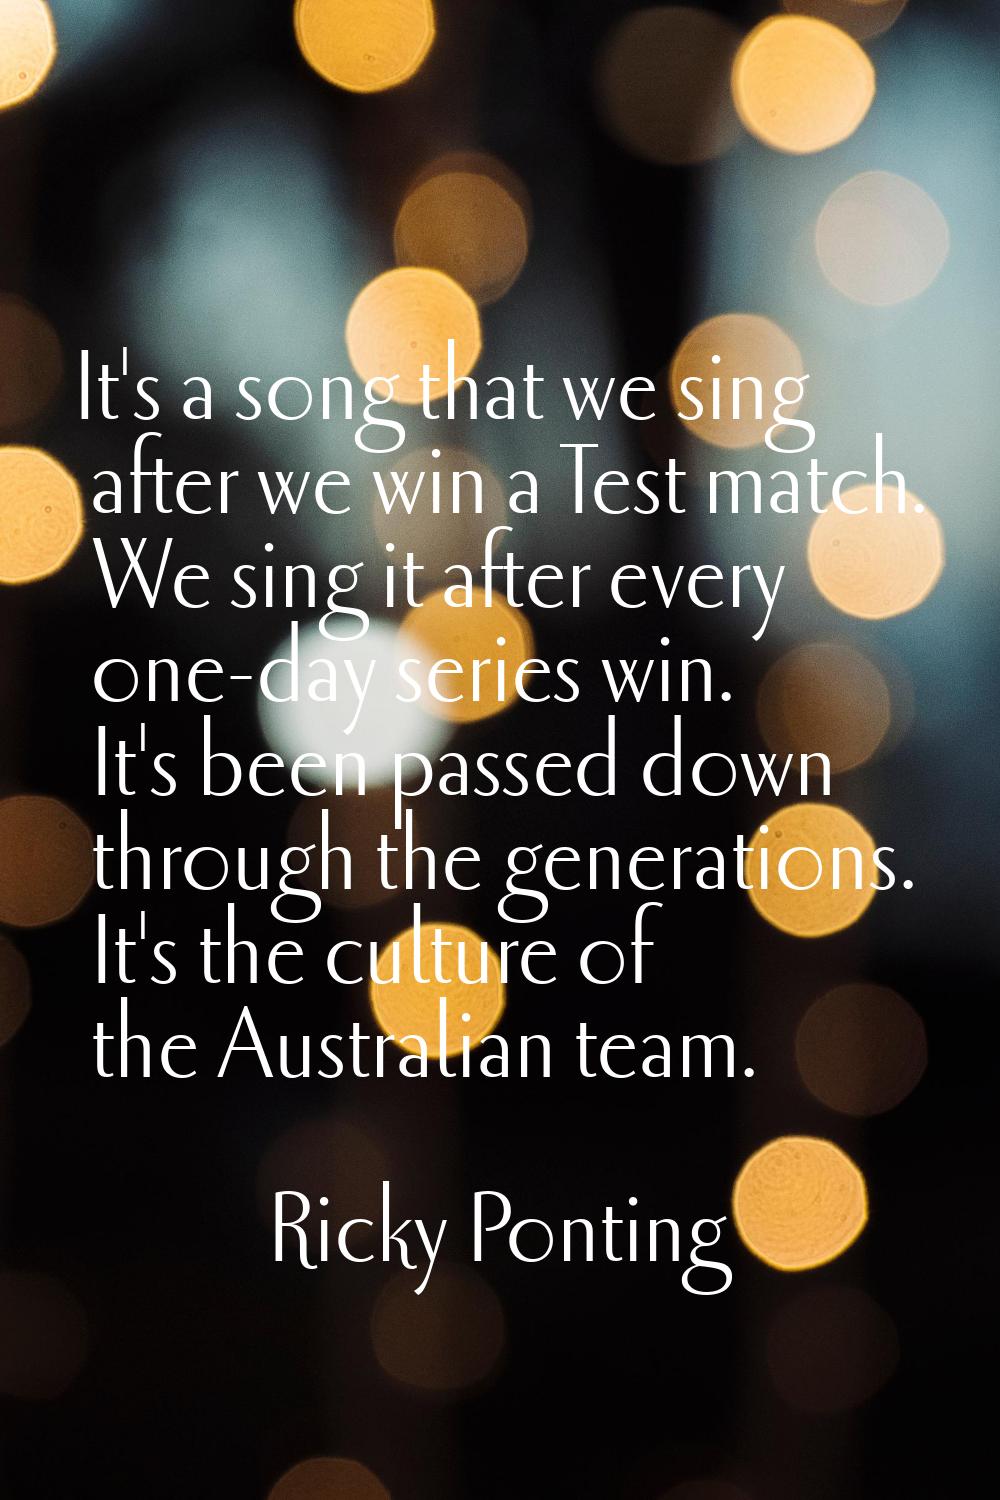 It's a song that we sing after we win a Test match. We sing it after every one-day series win. It's